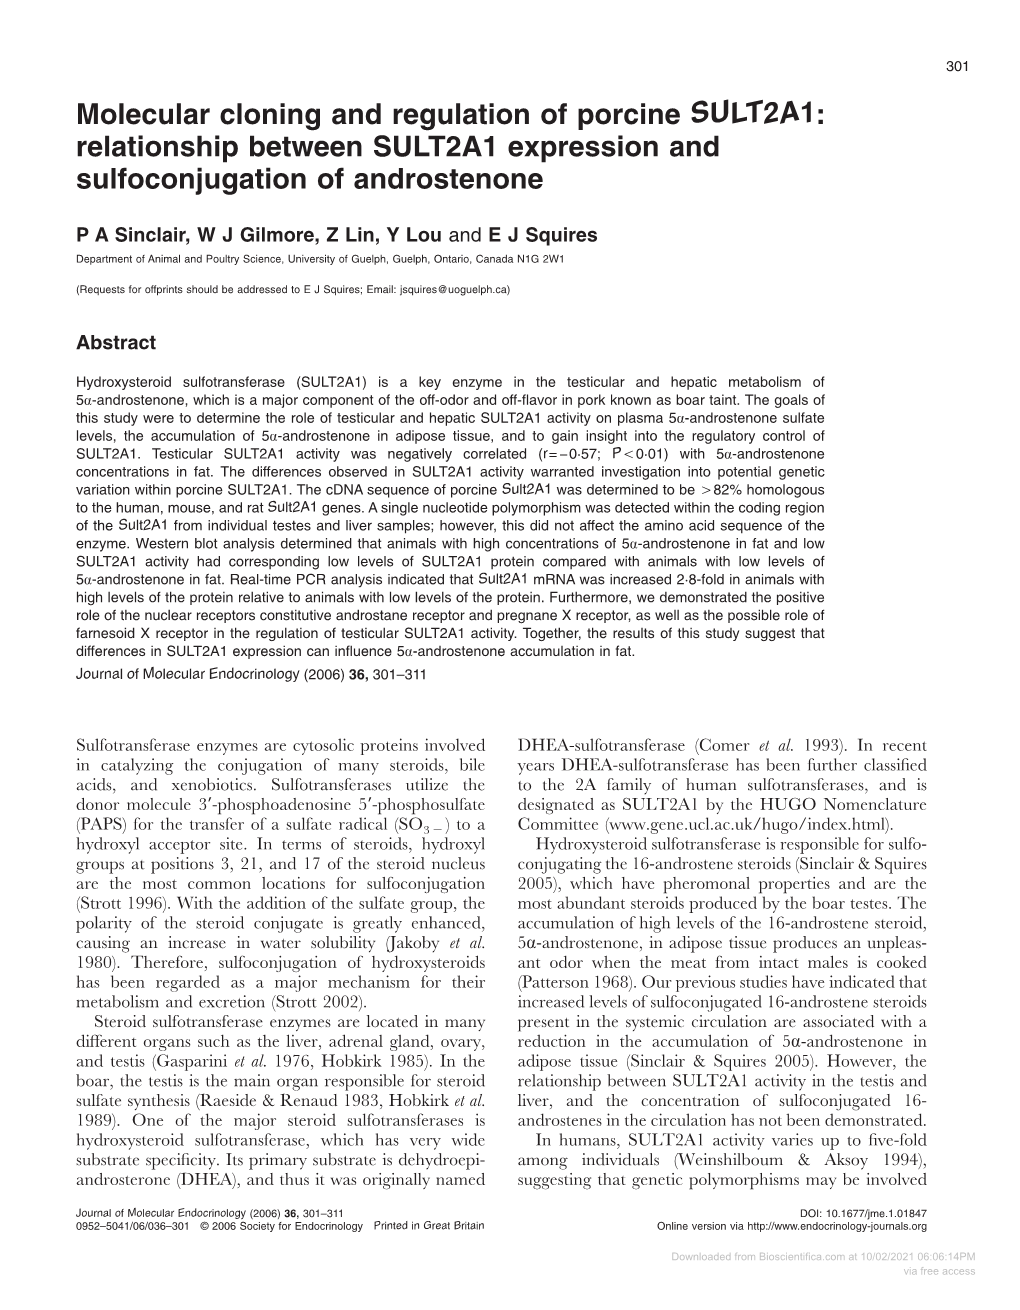 Relationship Between SULT2A1 Expression and Sulfoconjugation of Androstenone